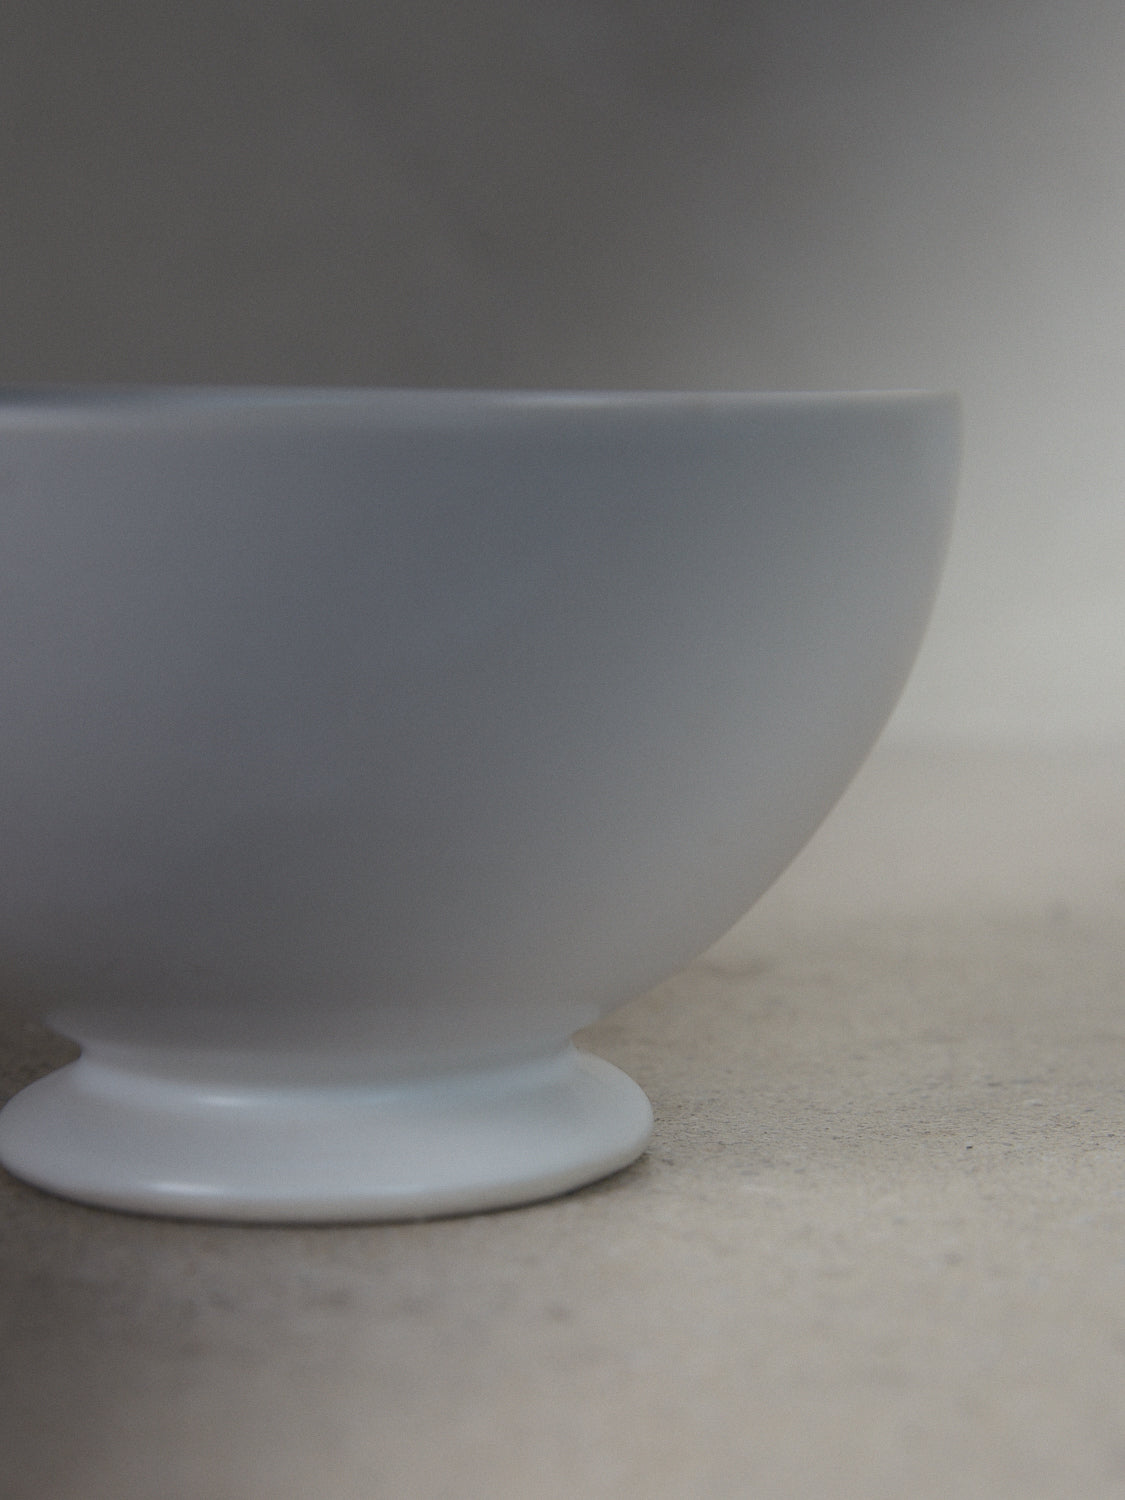 Raw Latte Bowl. Exclusively ours. Traditional hand sculpted French footed latte bowl in  matte, milky white stoneware.